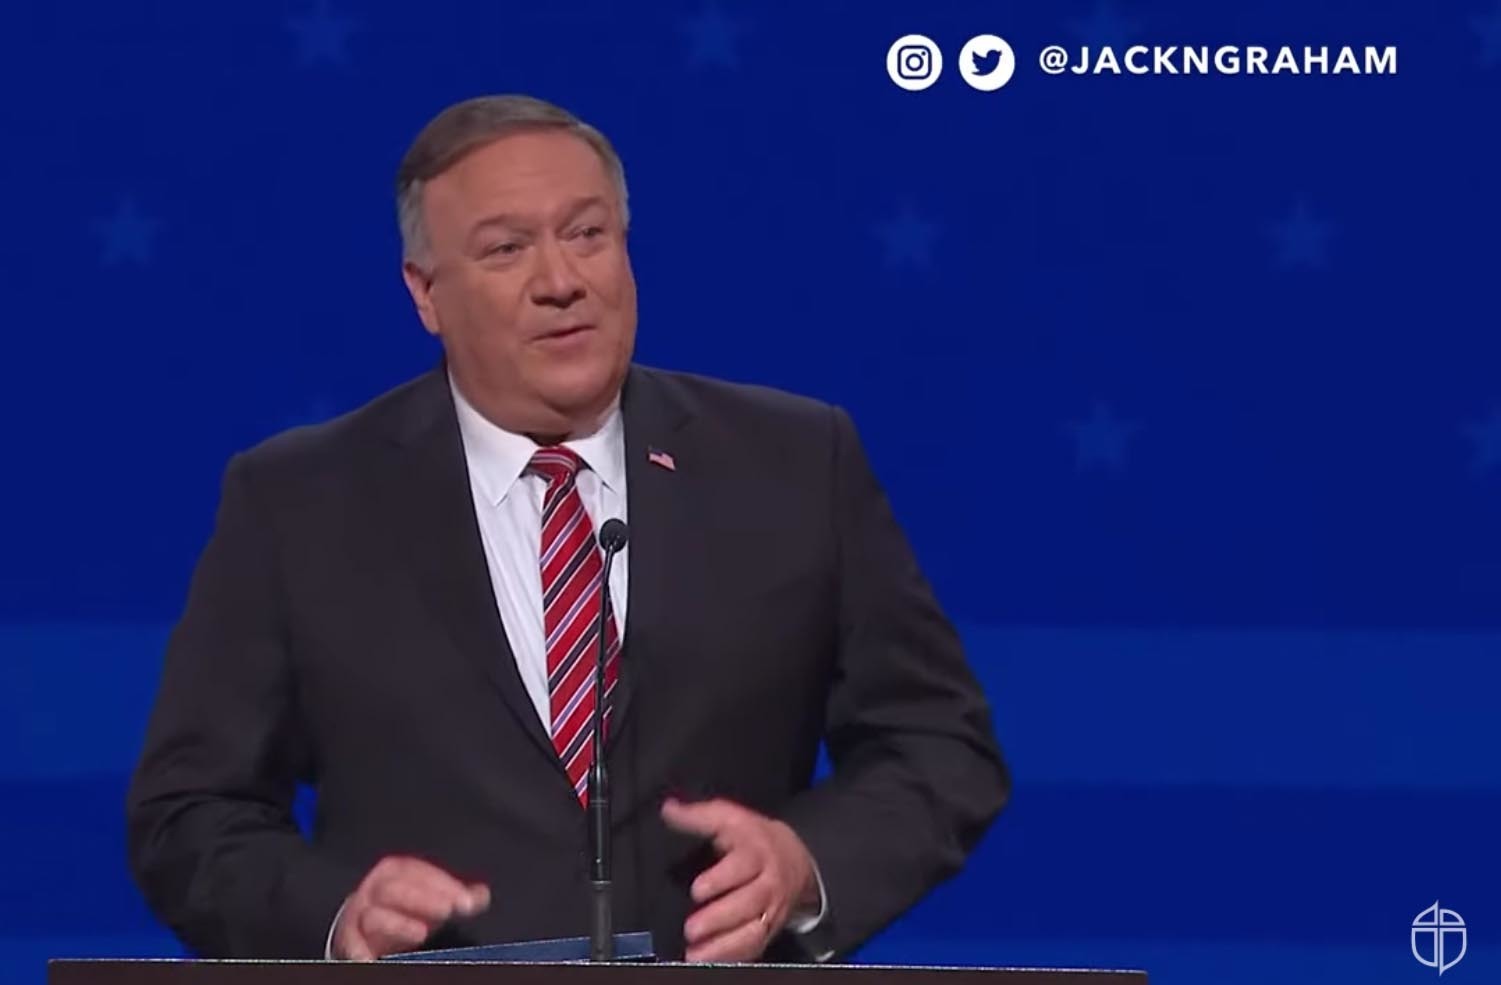 Mike Pompeo at megachurch: Don’t hide your light, America should keep faith in public square